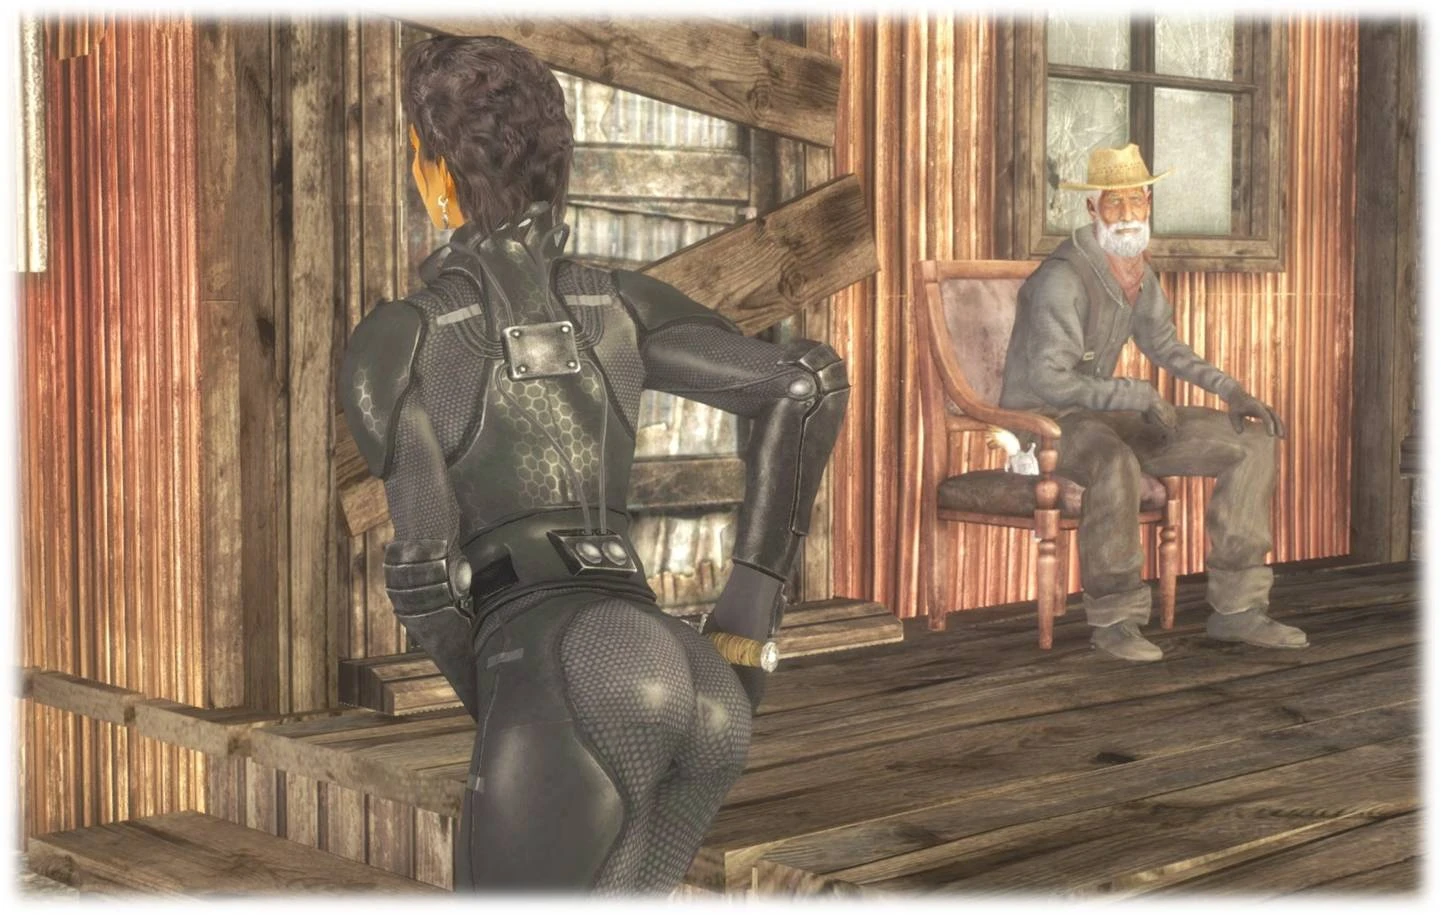 fallout new vegas chinese stealth armor mod